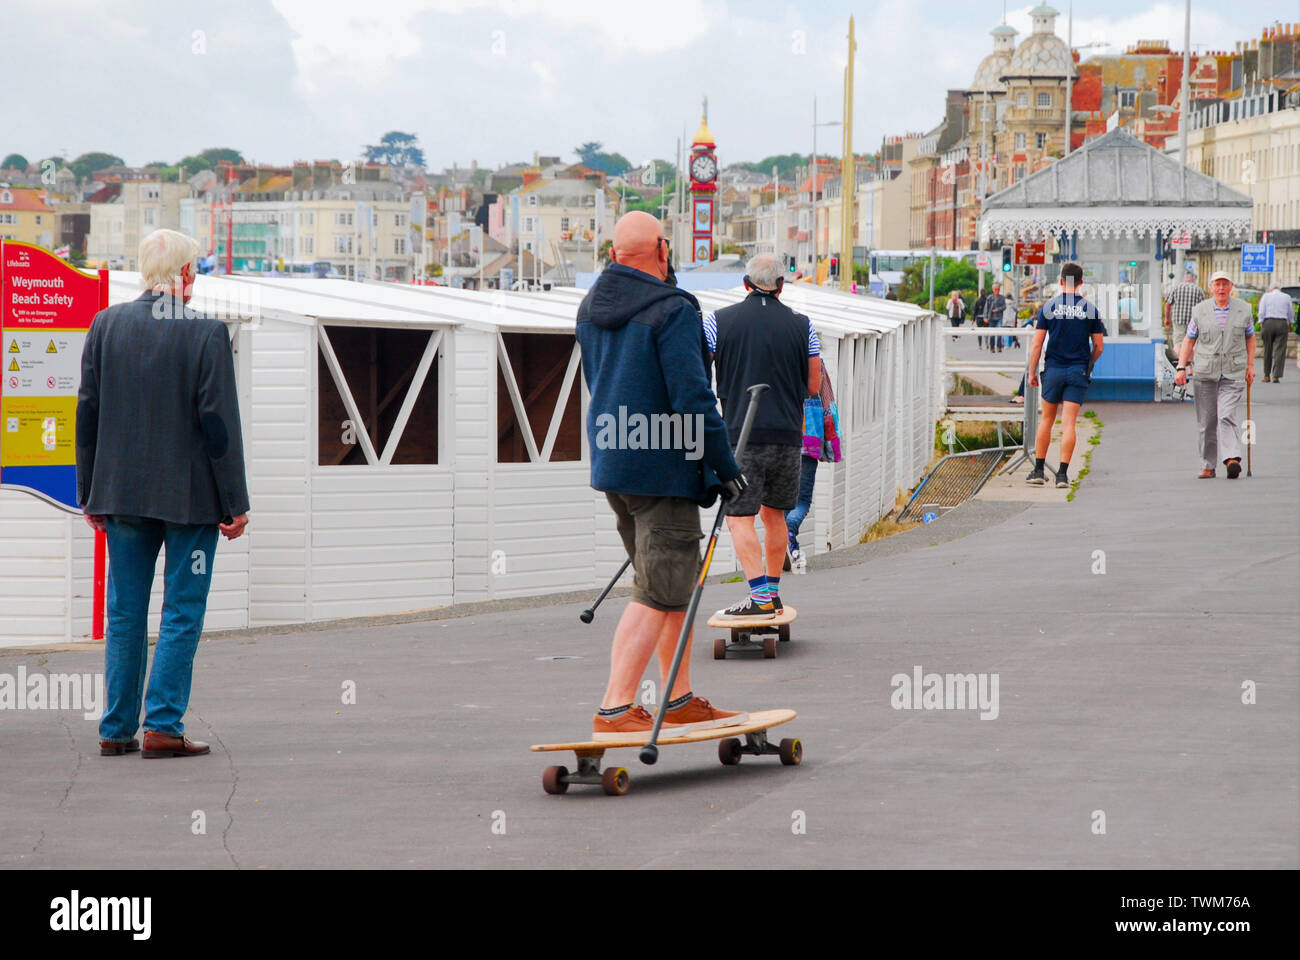 Weymouth, Dorset. 21st June 2019. UK Weather: Two men 'punt' their way along Weymouth promenade on the day of the sunny Summer Solstice. credit: stuart fretwell/Alamy Live News Stock Photo